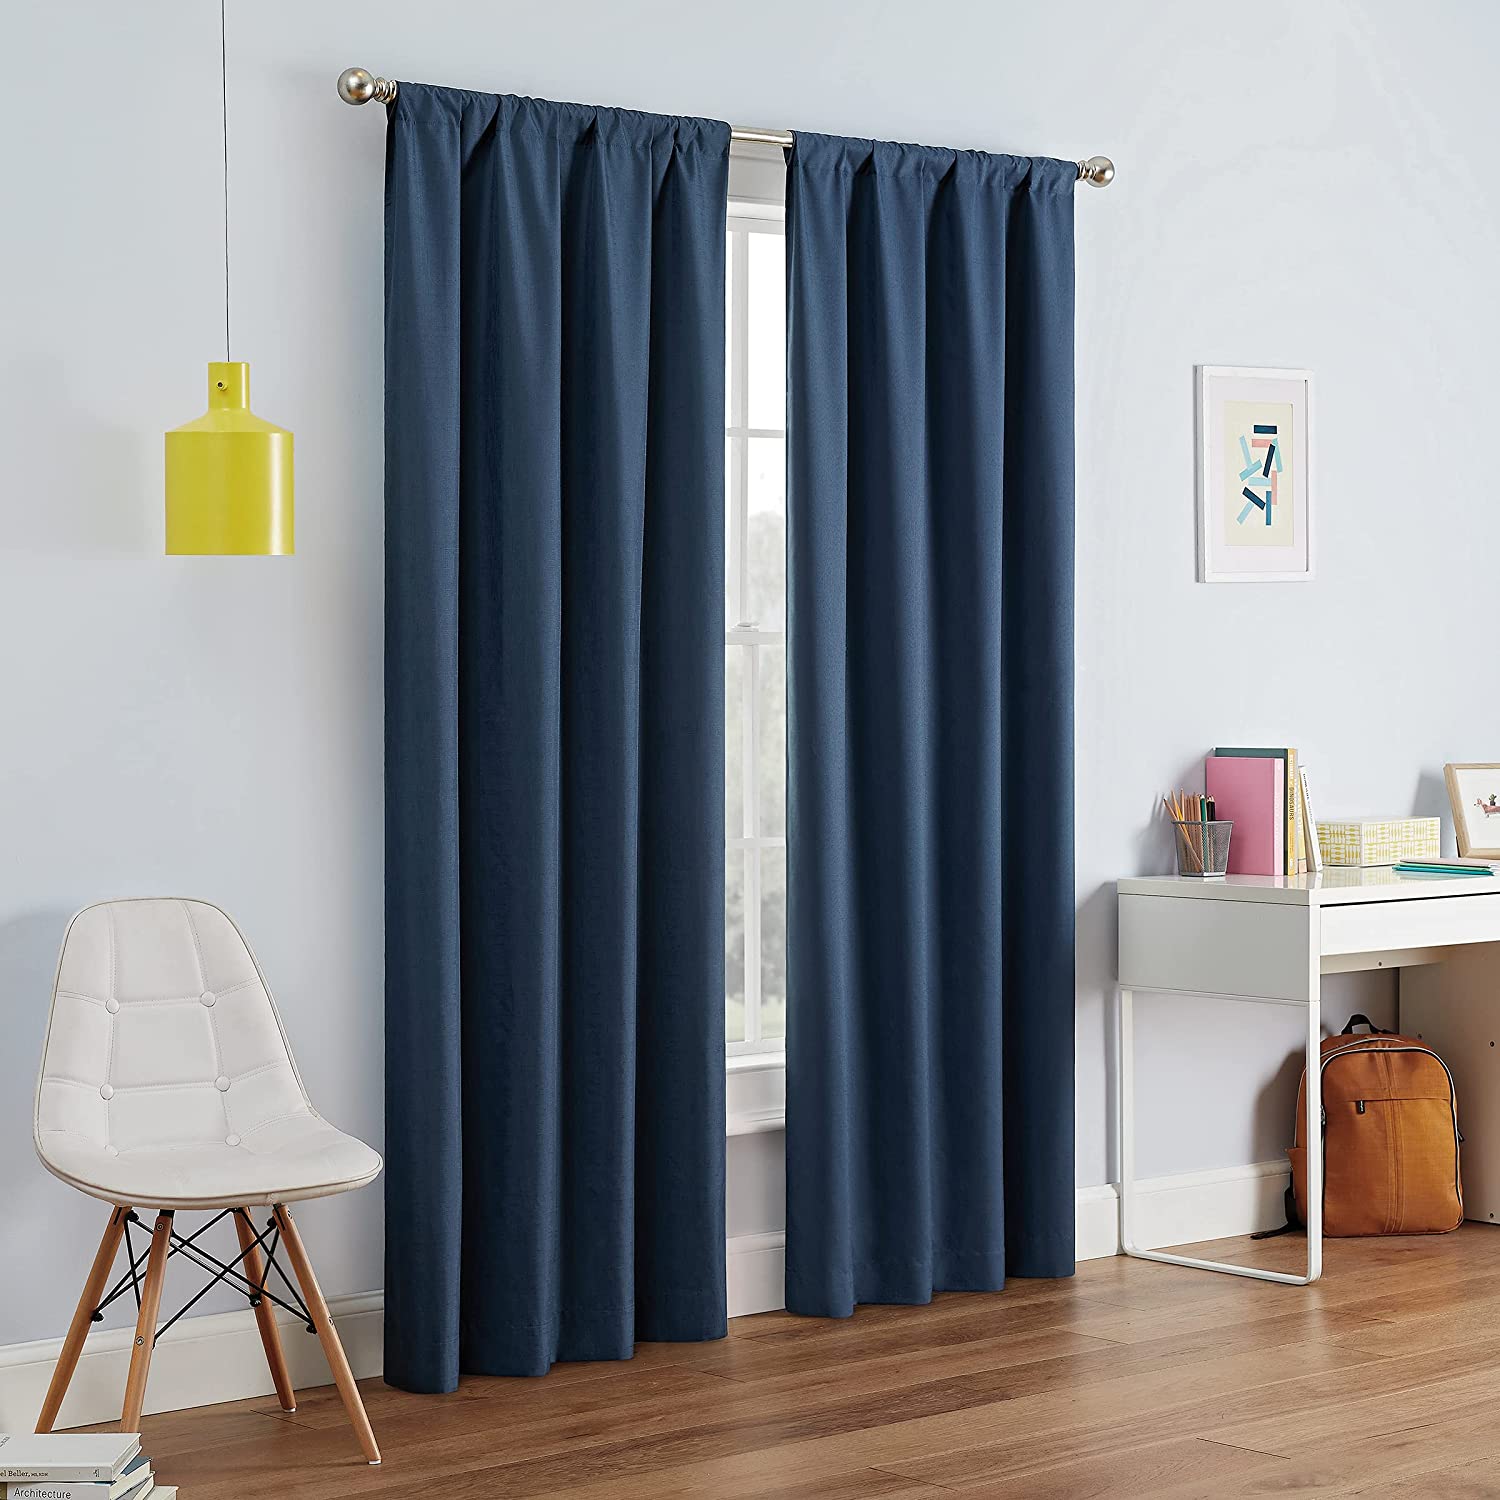 ECLIPSE Light-Blocking Energy Efficient Thermal Curtains